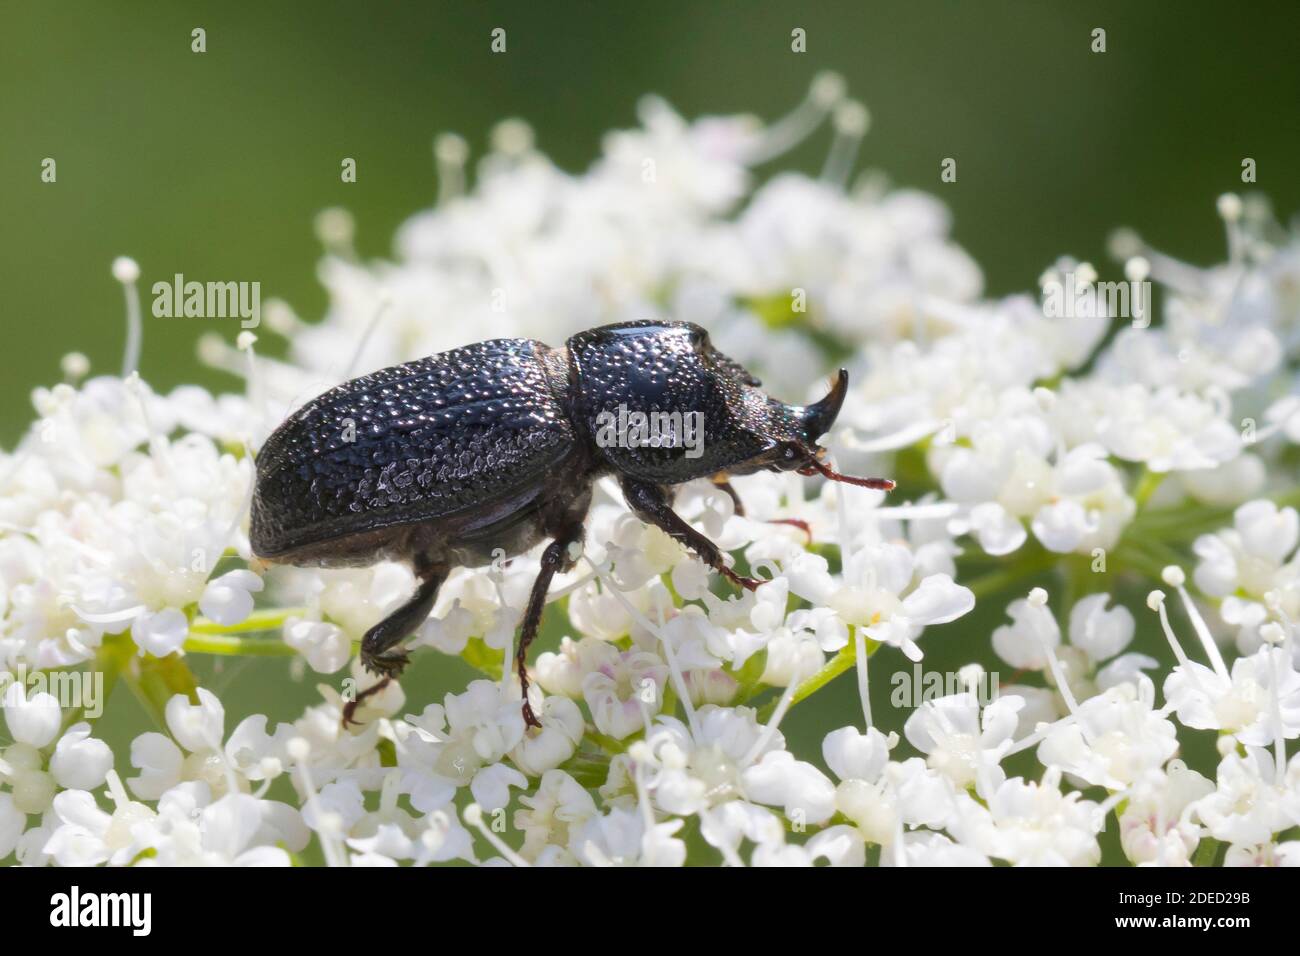 rhinoceros beetle, small European rhinoceros beetle (Sinodendron cylindricum), male at blossom attendance on a flower umbel, side view, Germany Stock Photo